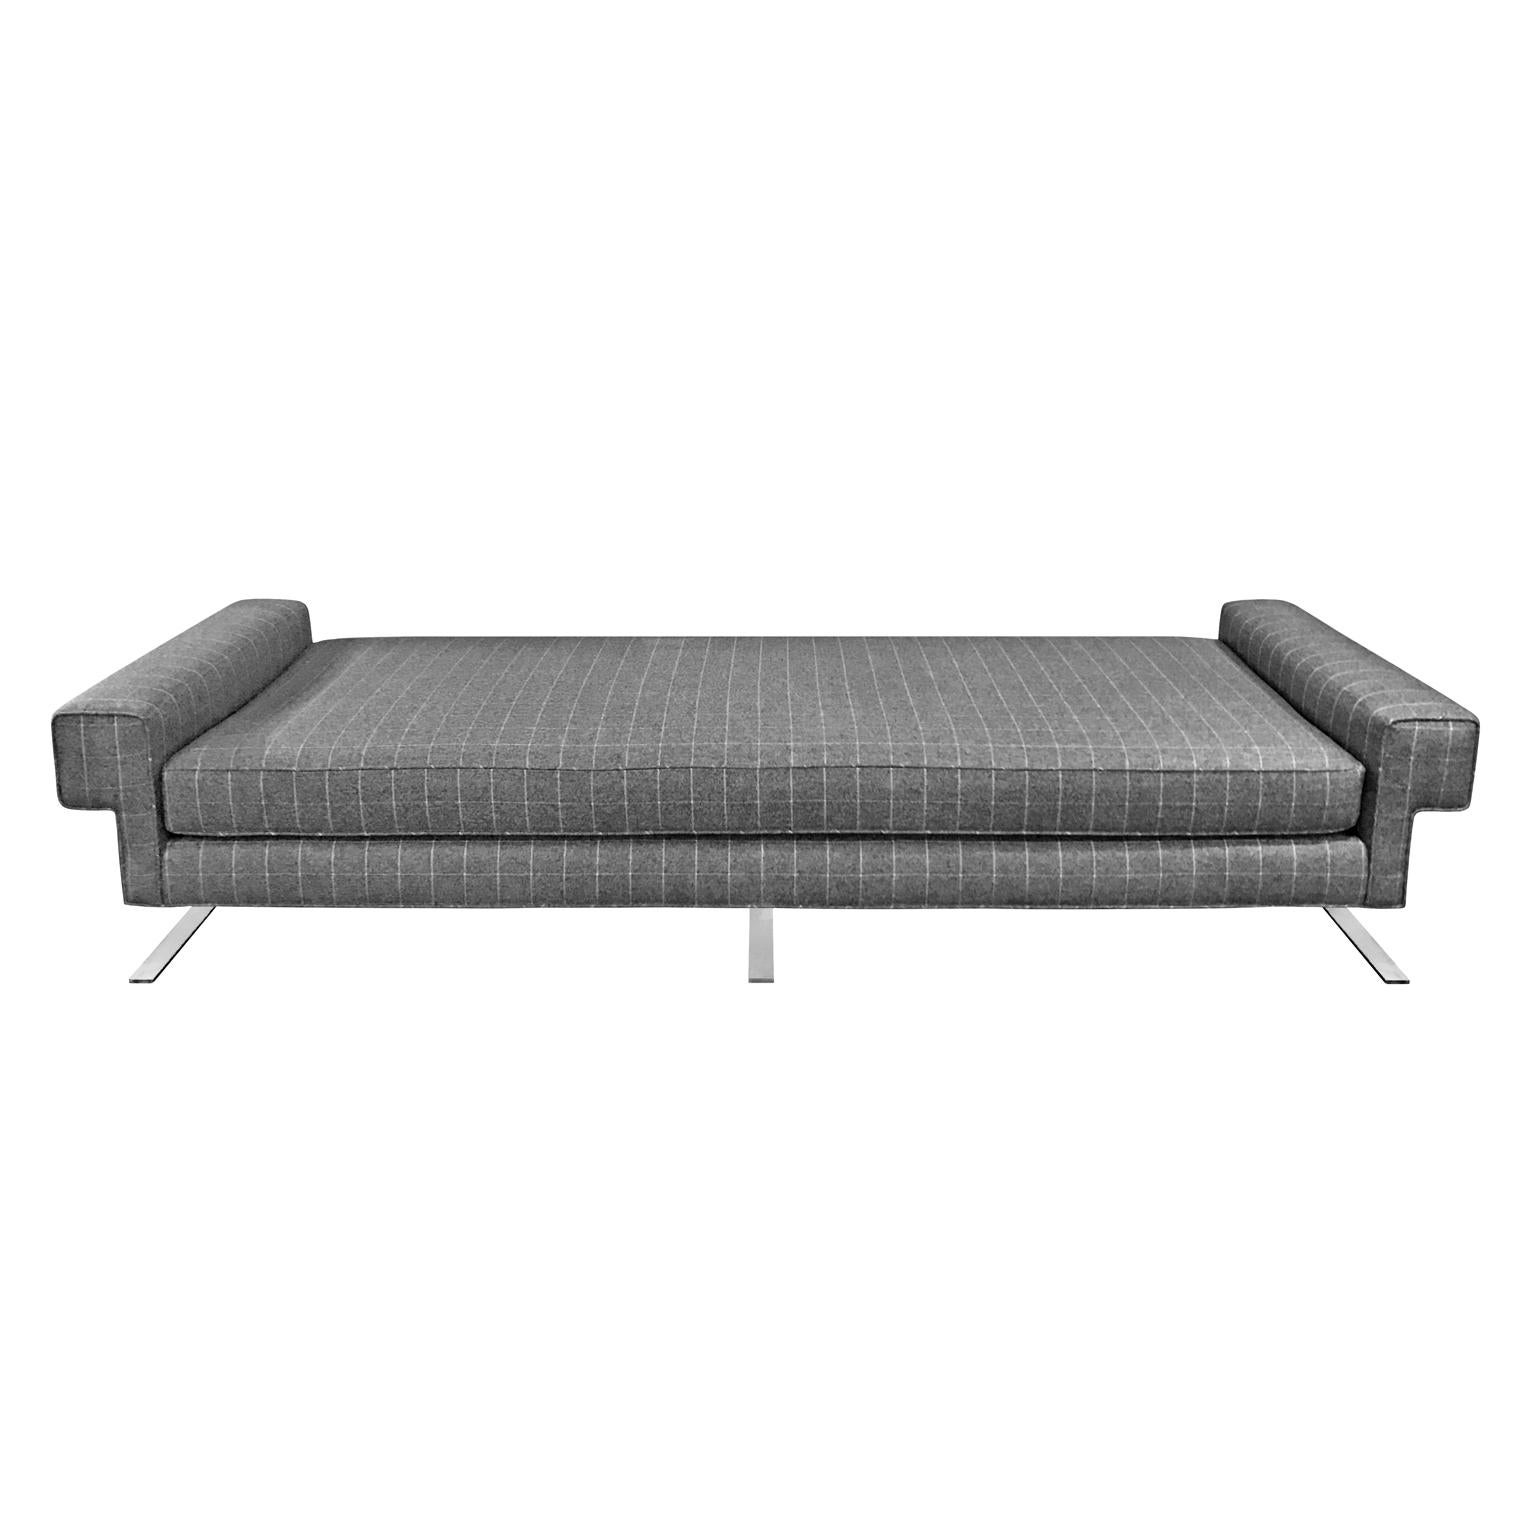 Vintage daybed newly upholstered in grey windowpane flannel on chromed iron base, USA, 1965.